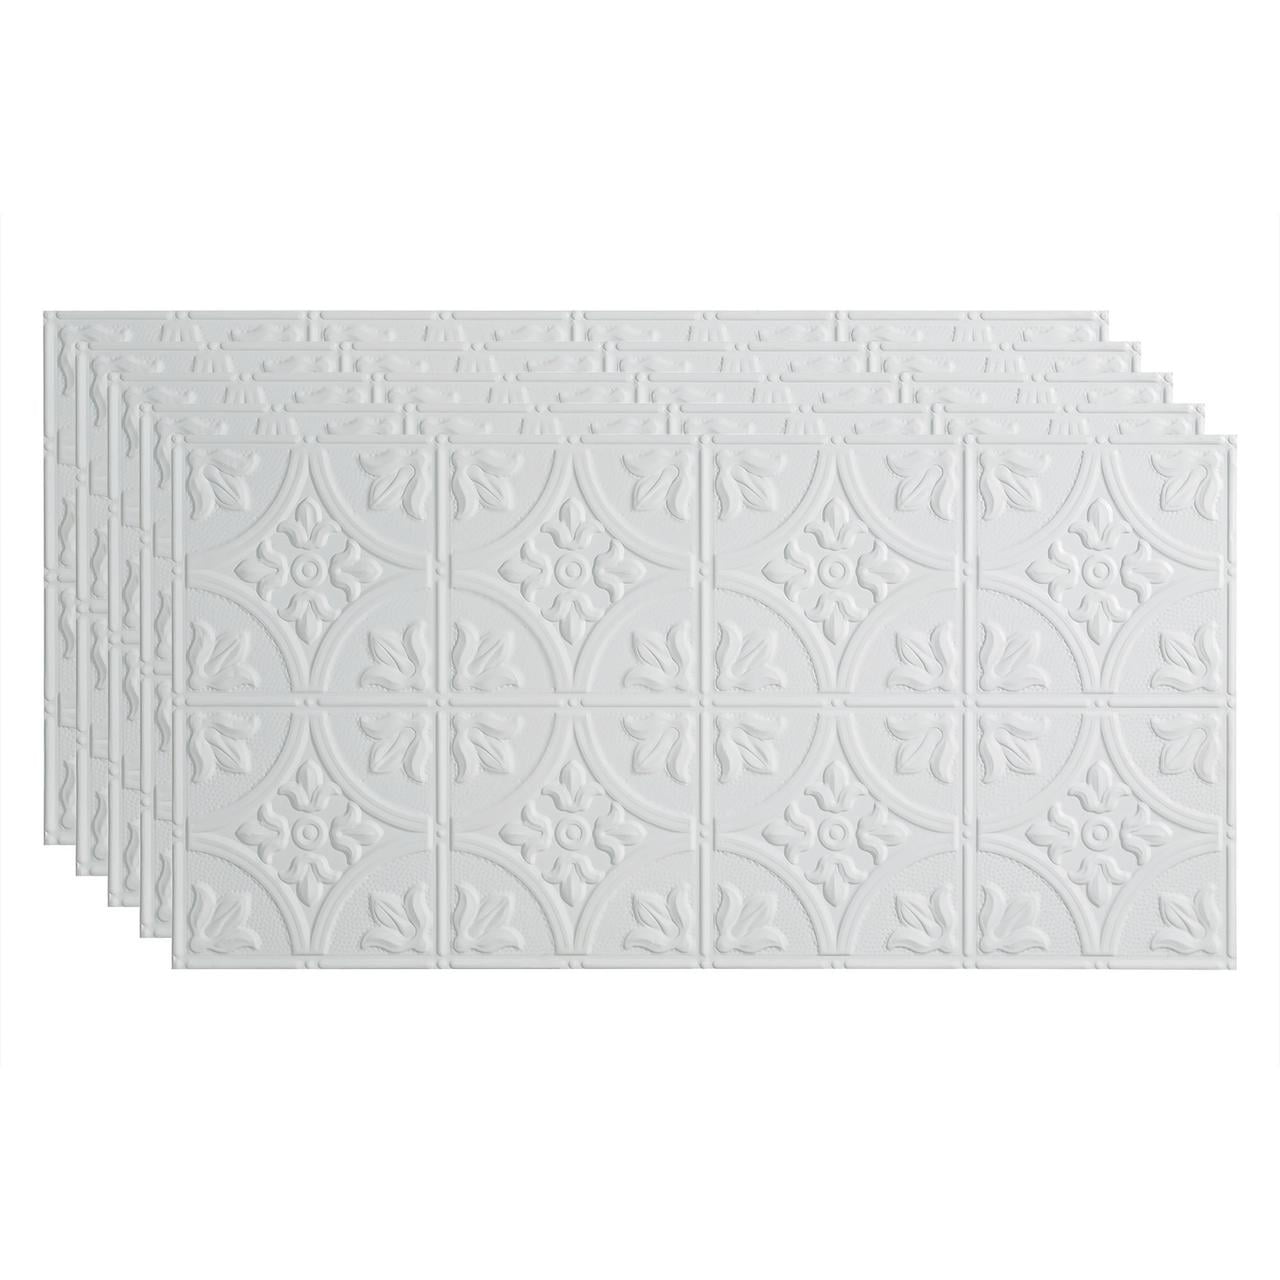  NEW 6 SHEETS AMERICAN GREETINGS TISSUE PAPER SIZE 21.6sqft SNOWFLAKES 